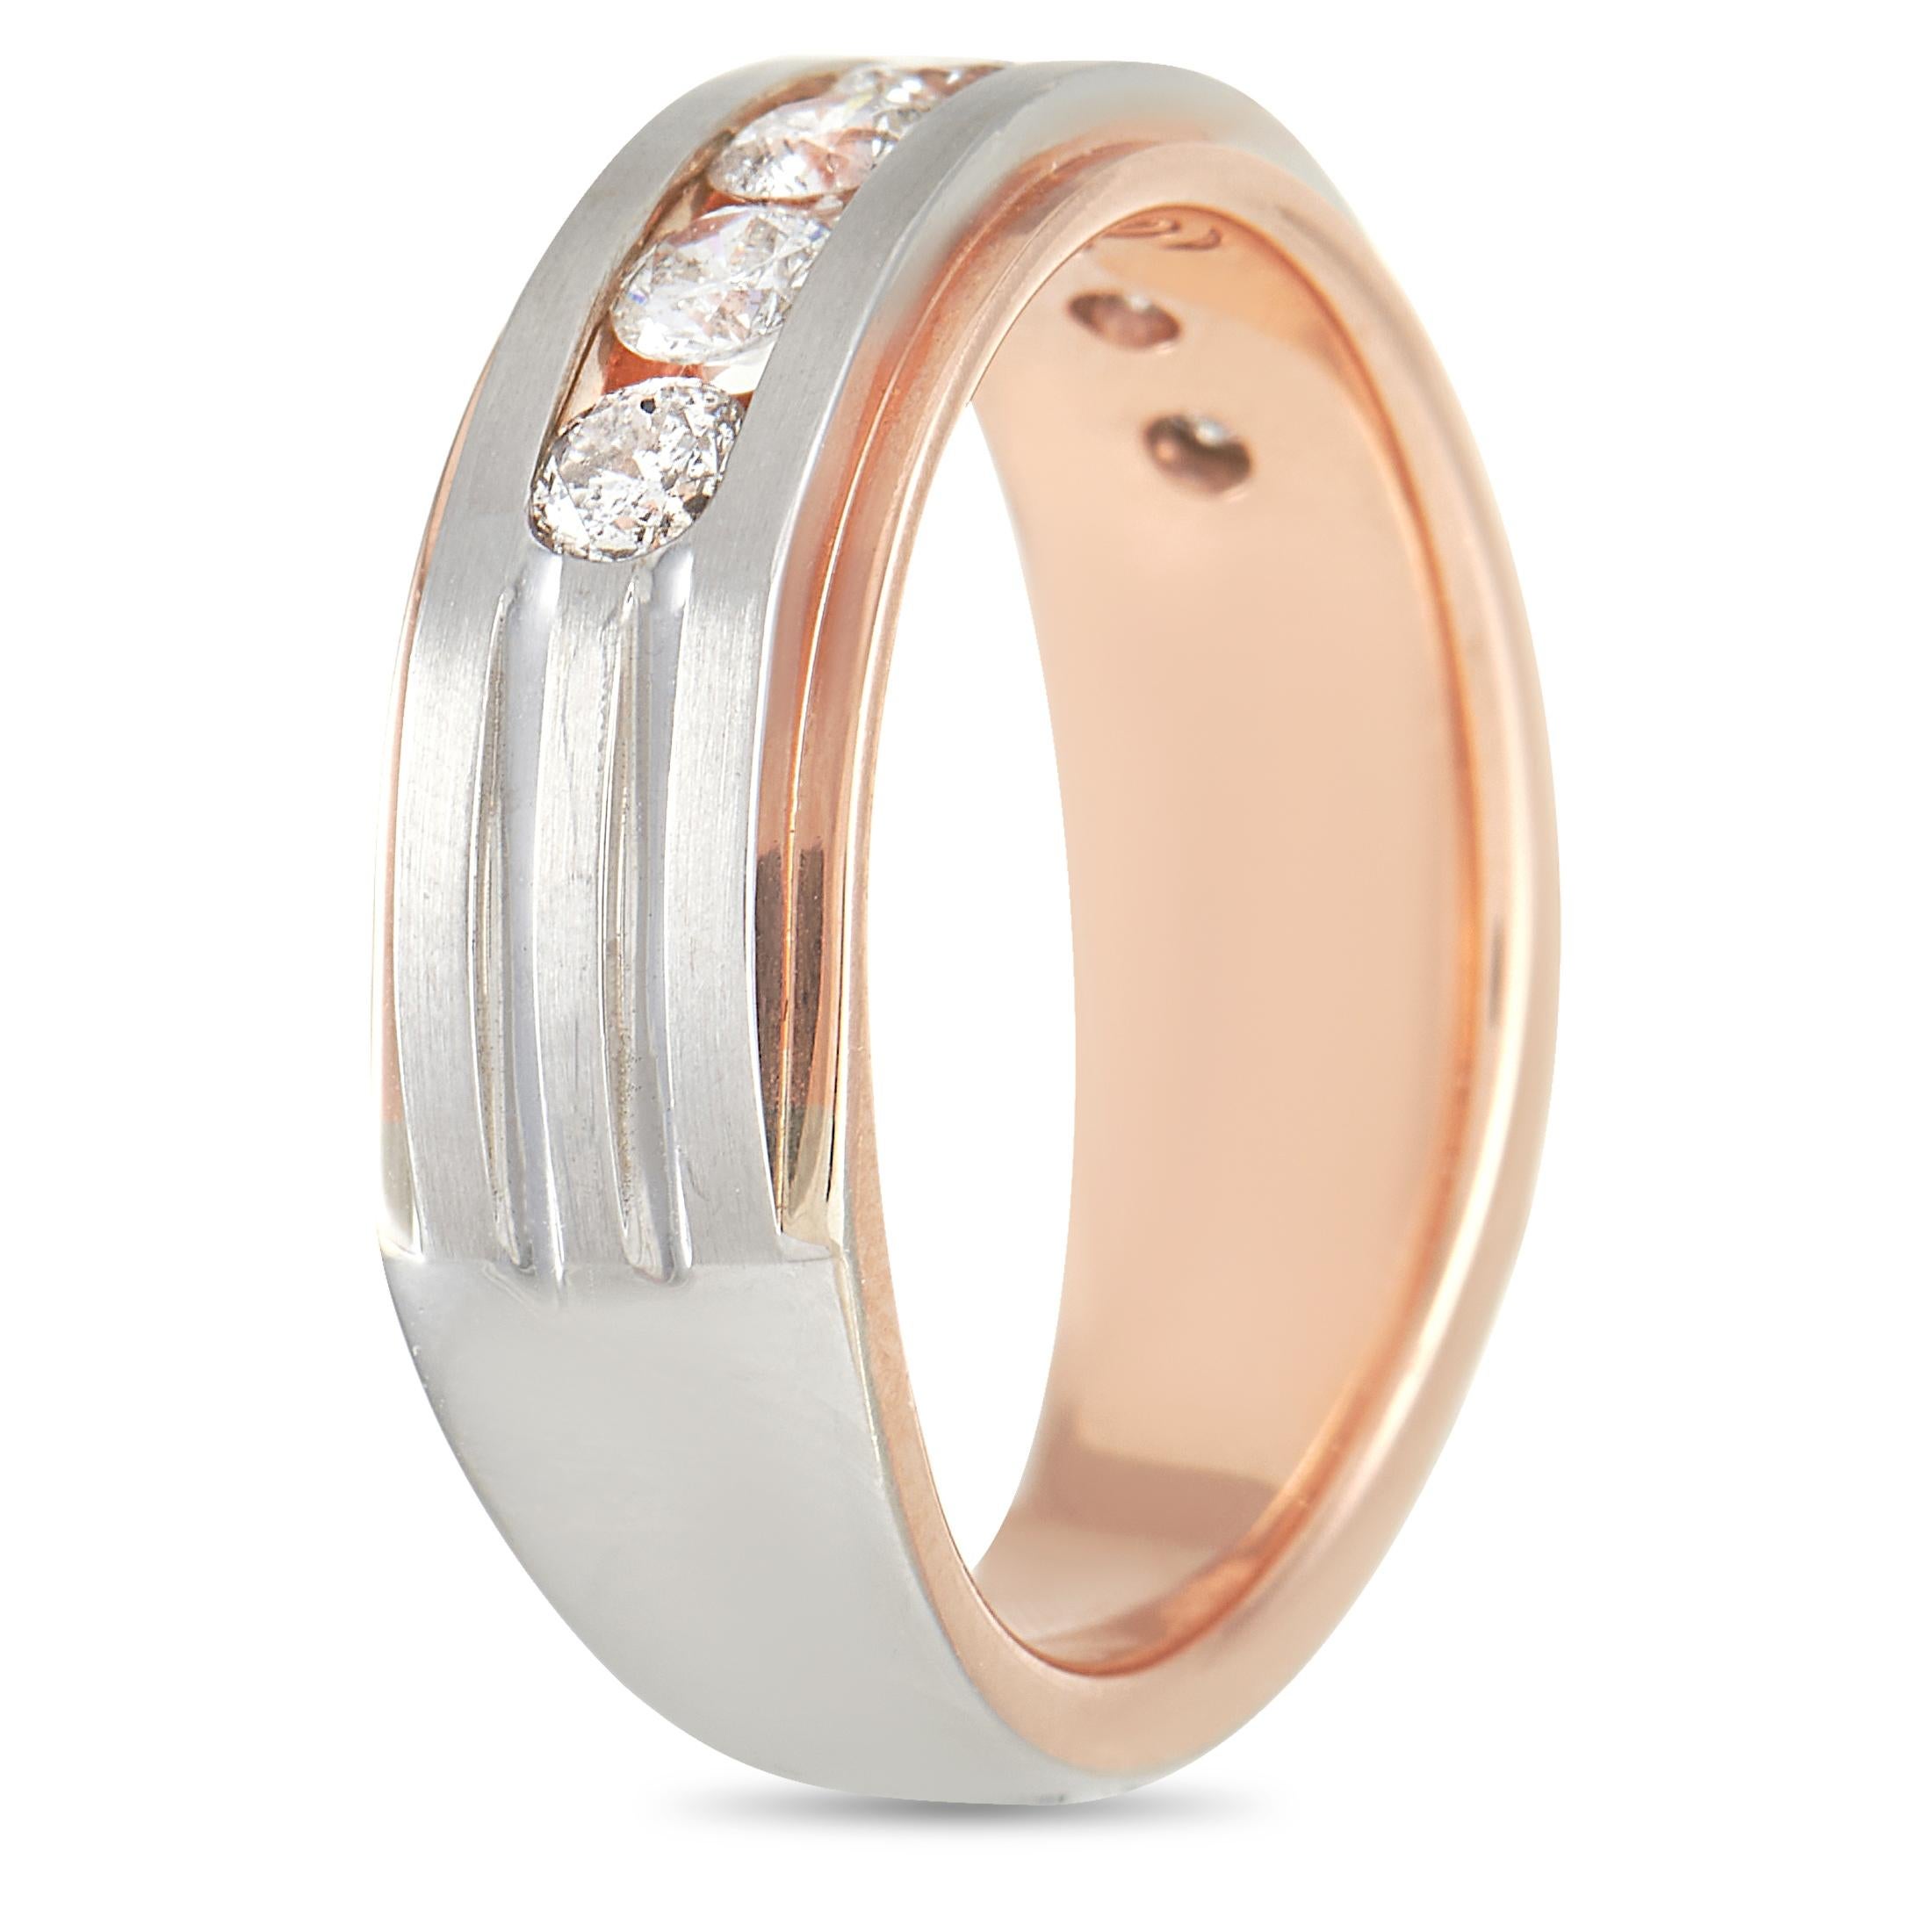 A striking two-toned design sets this band ring apart for all the right reasons. The base of this ring is crafted from lustrous 14K rose gold, which has been accented by a second band made of contrasting 14K white gold. At the center, 7 channel set